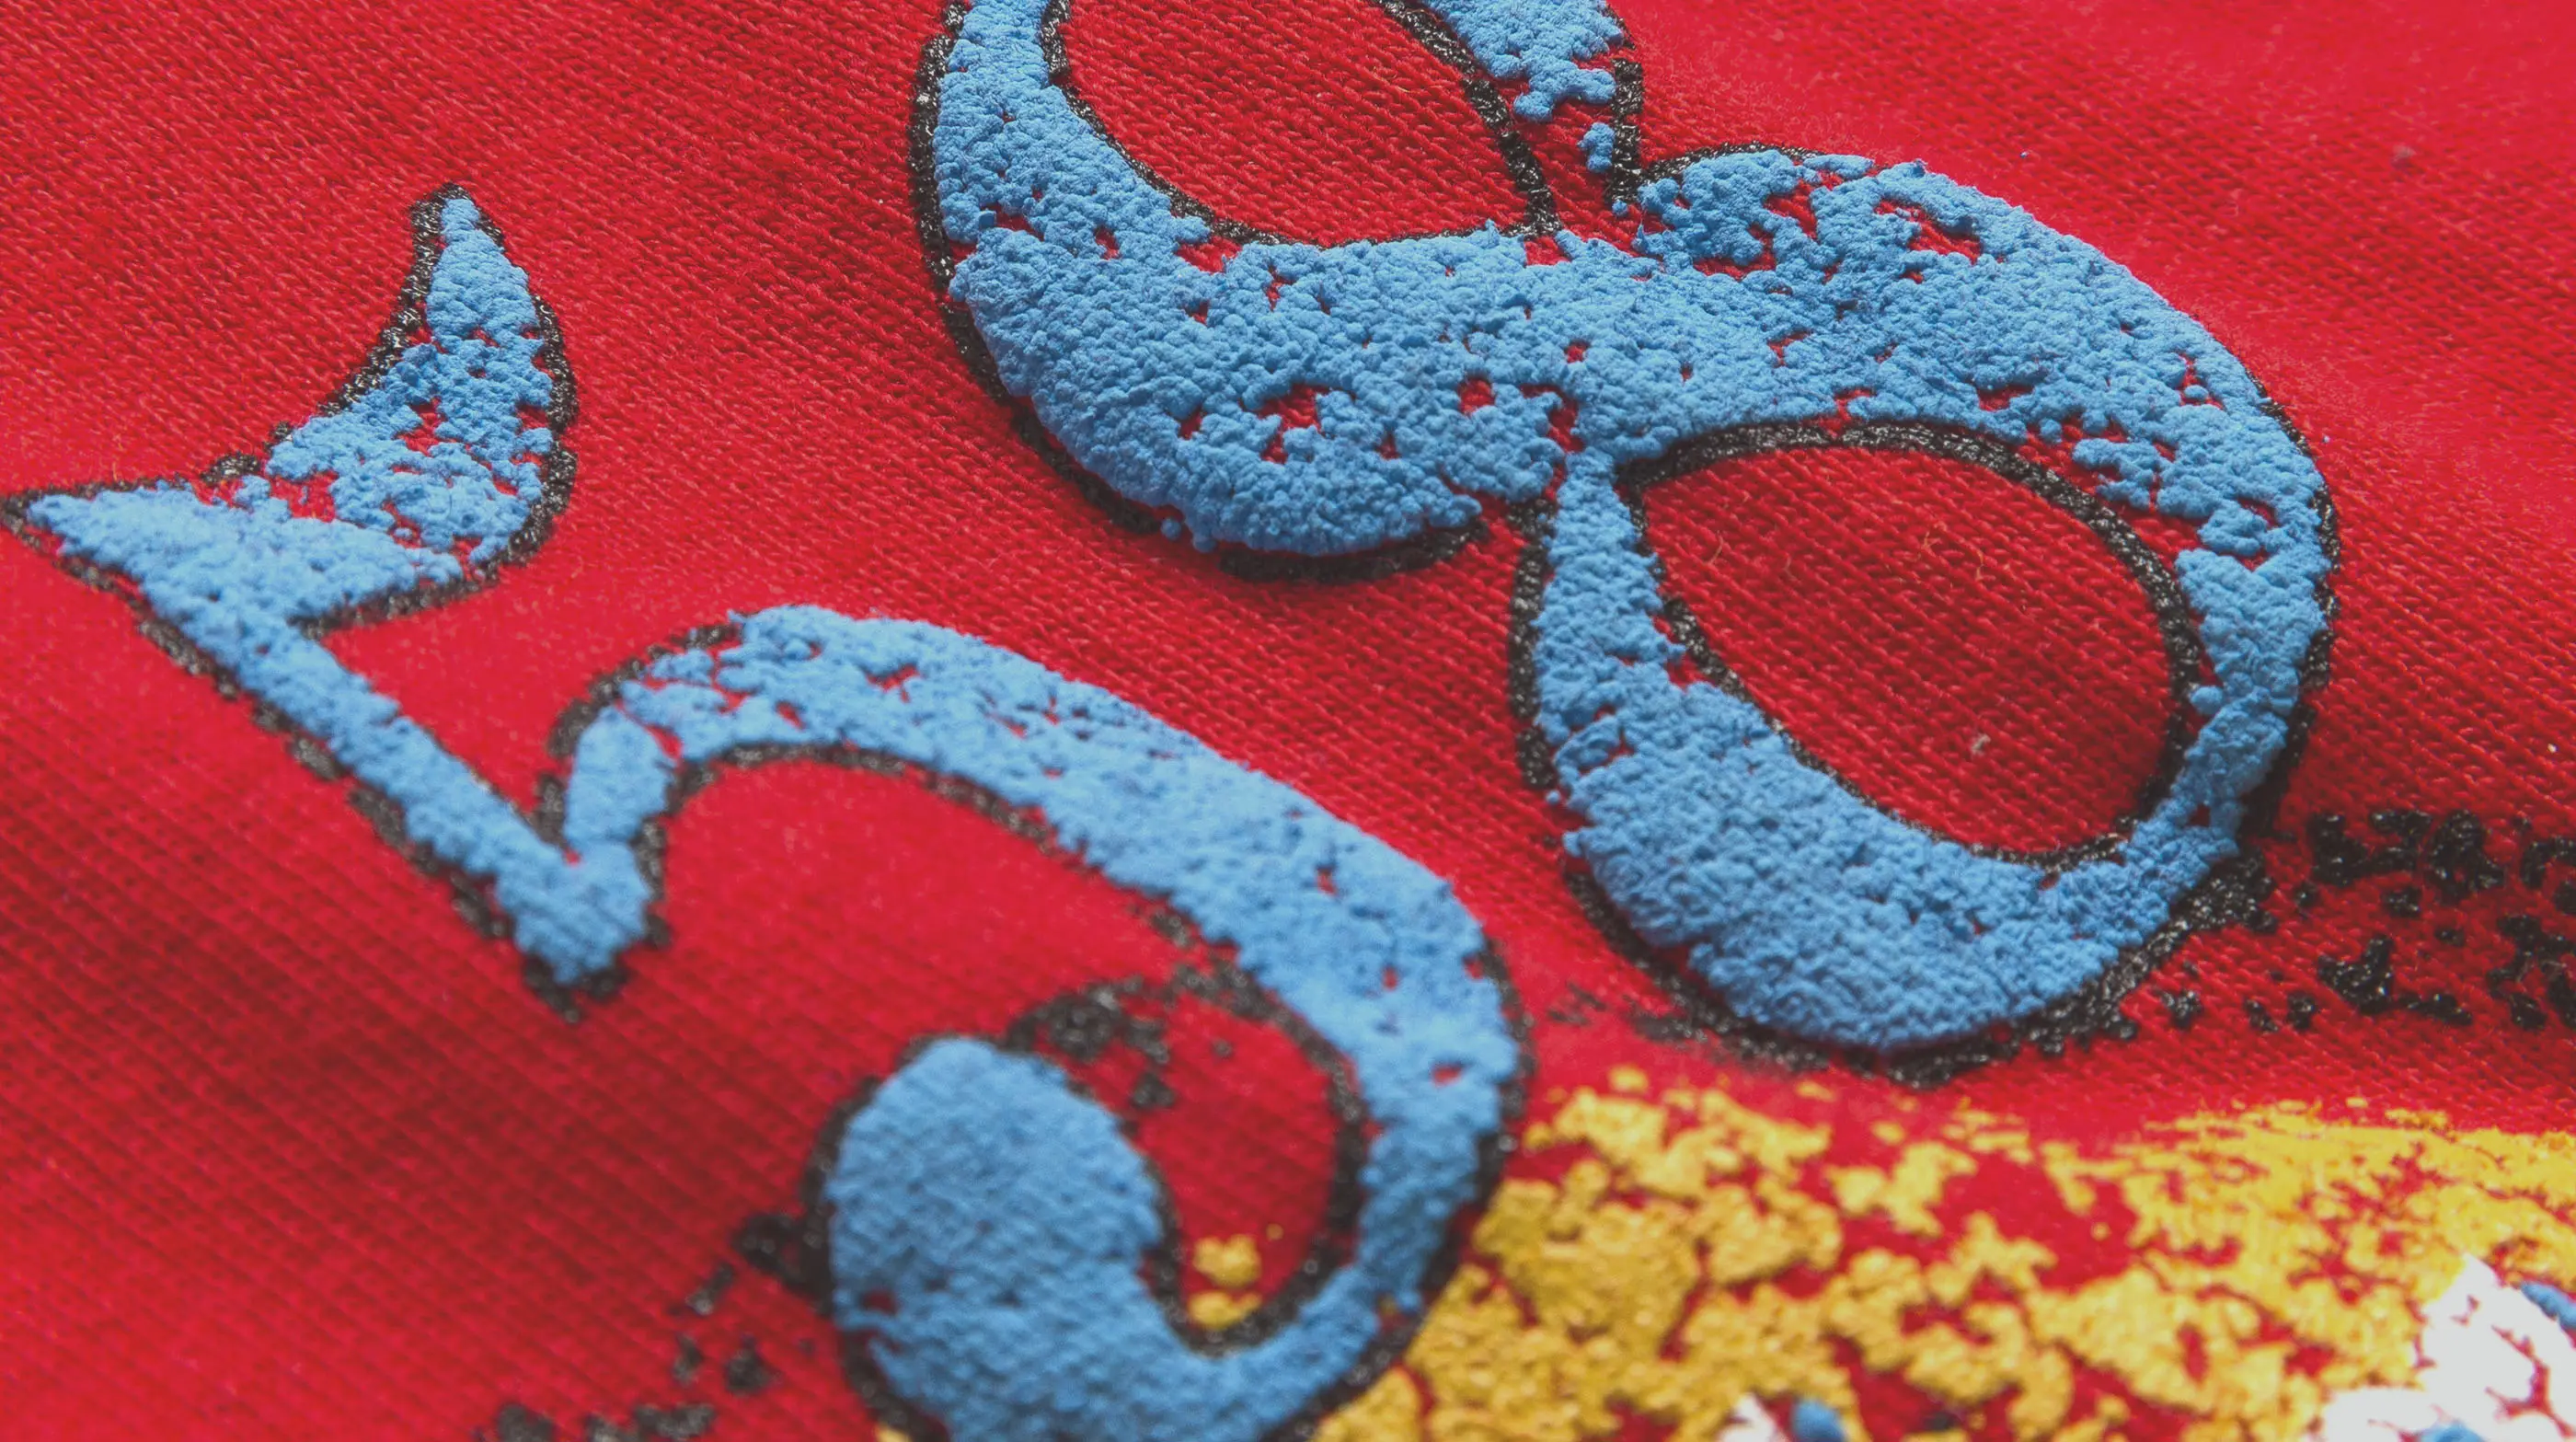 Closeup of stitching on an embroidered garment